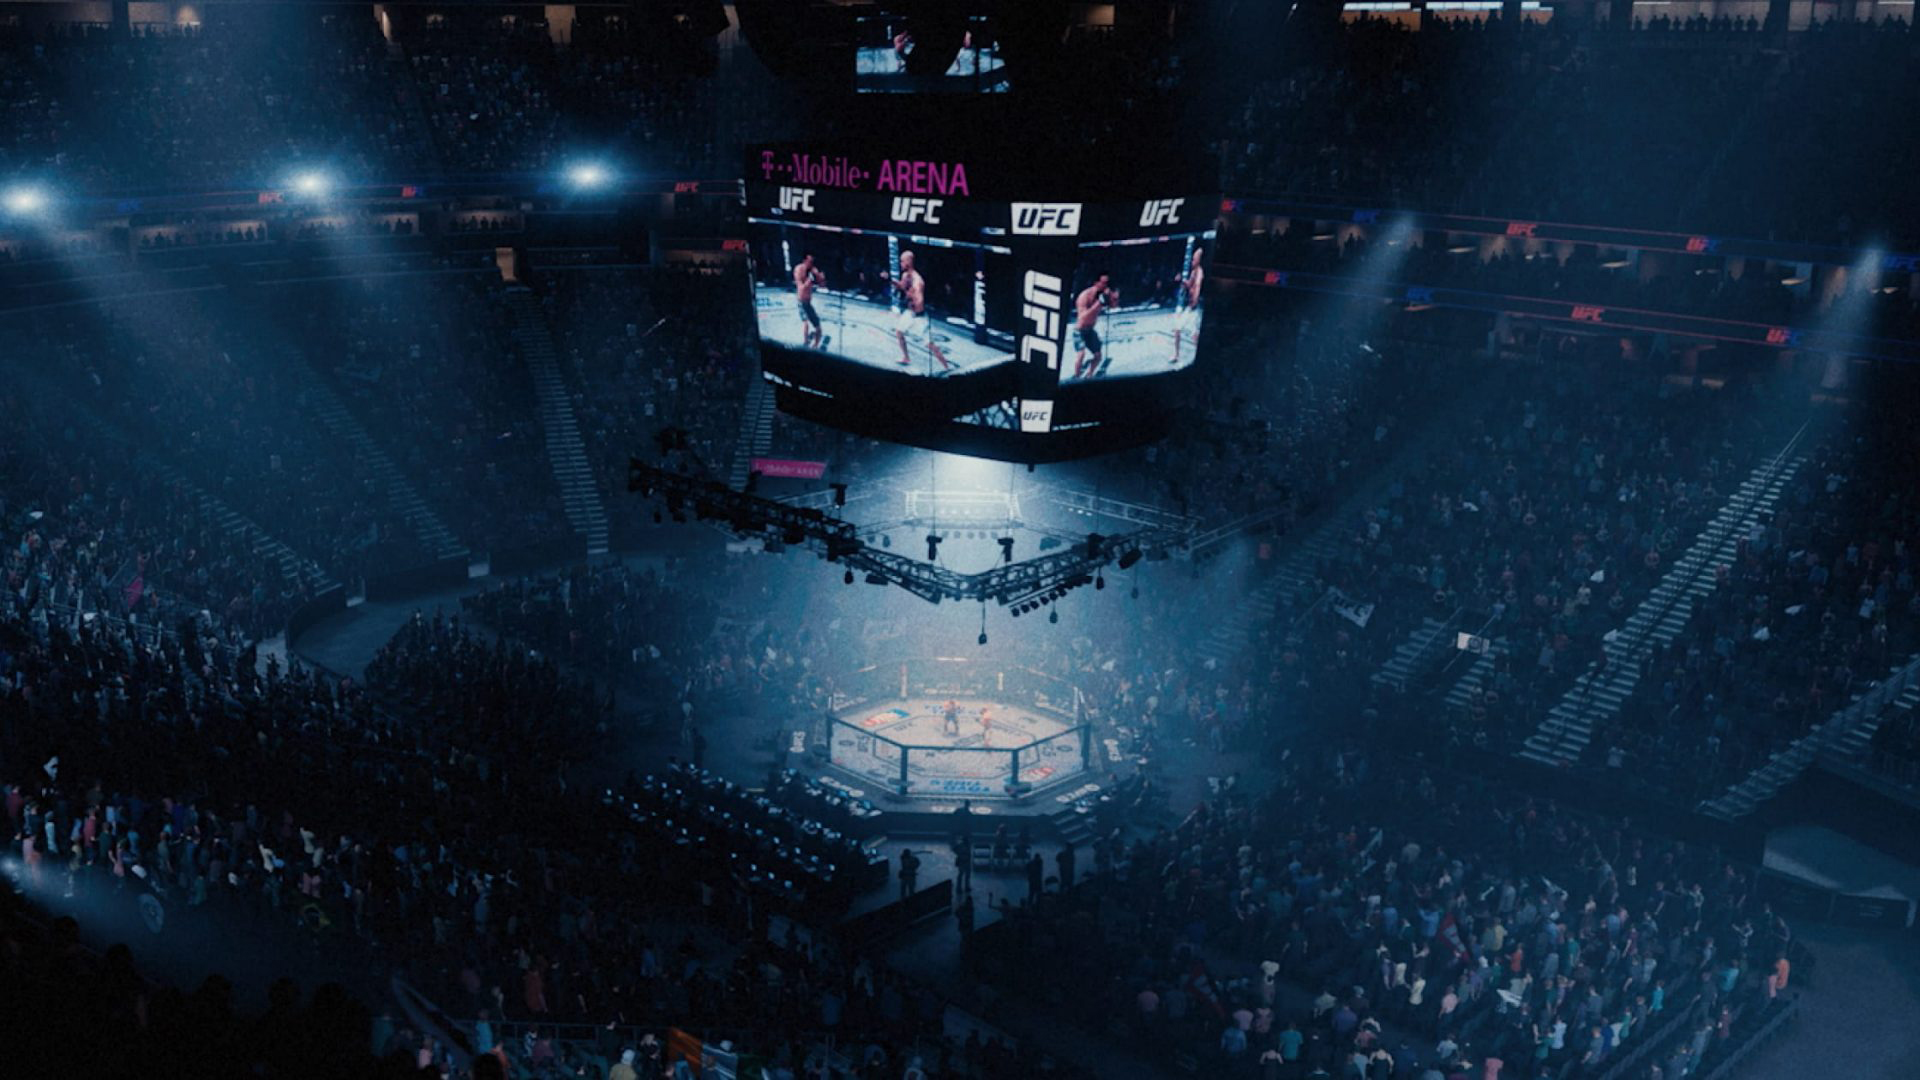 EA SPORTS UFC 5 Arrives October 27: Feel the Fight With Visceral